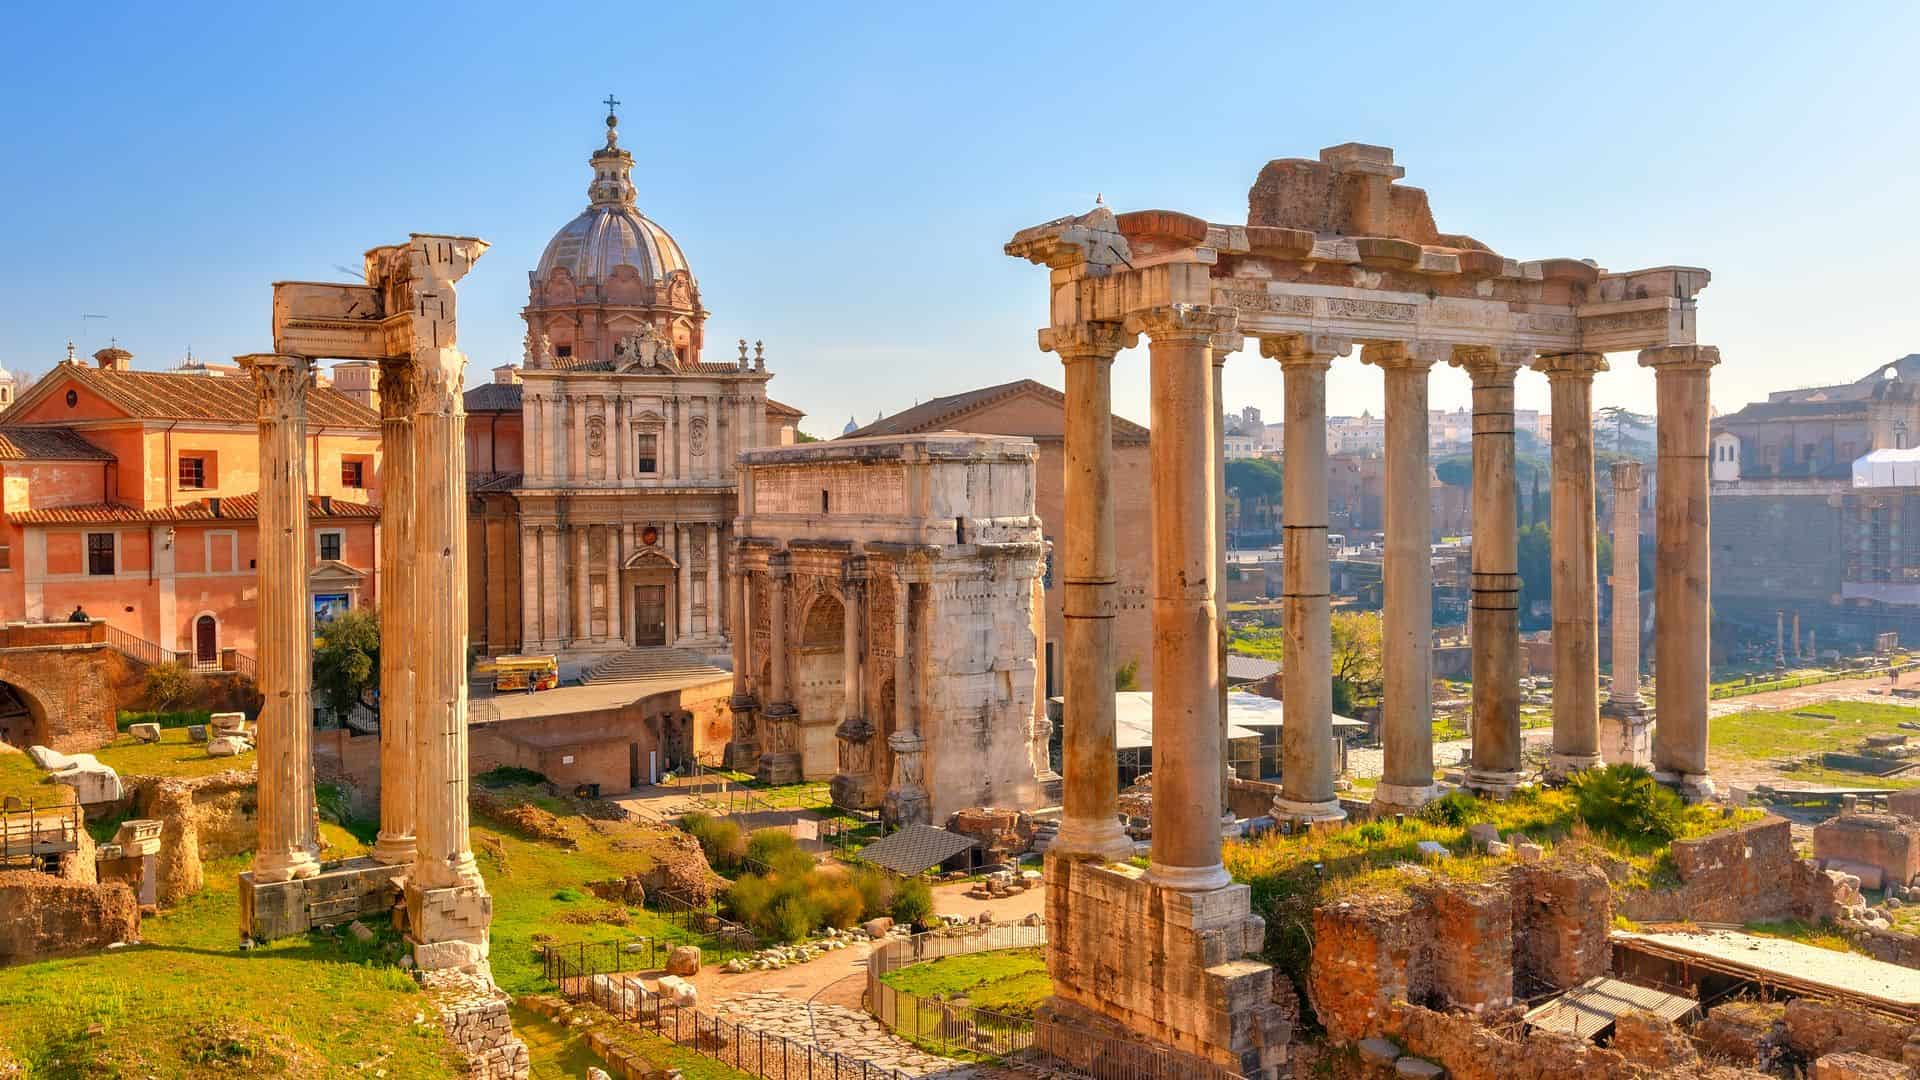 View of the Roman Forum, featuring the Arch of Septimius Severus in the center and the Temple of Saturn on the right.